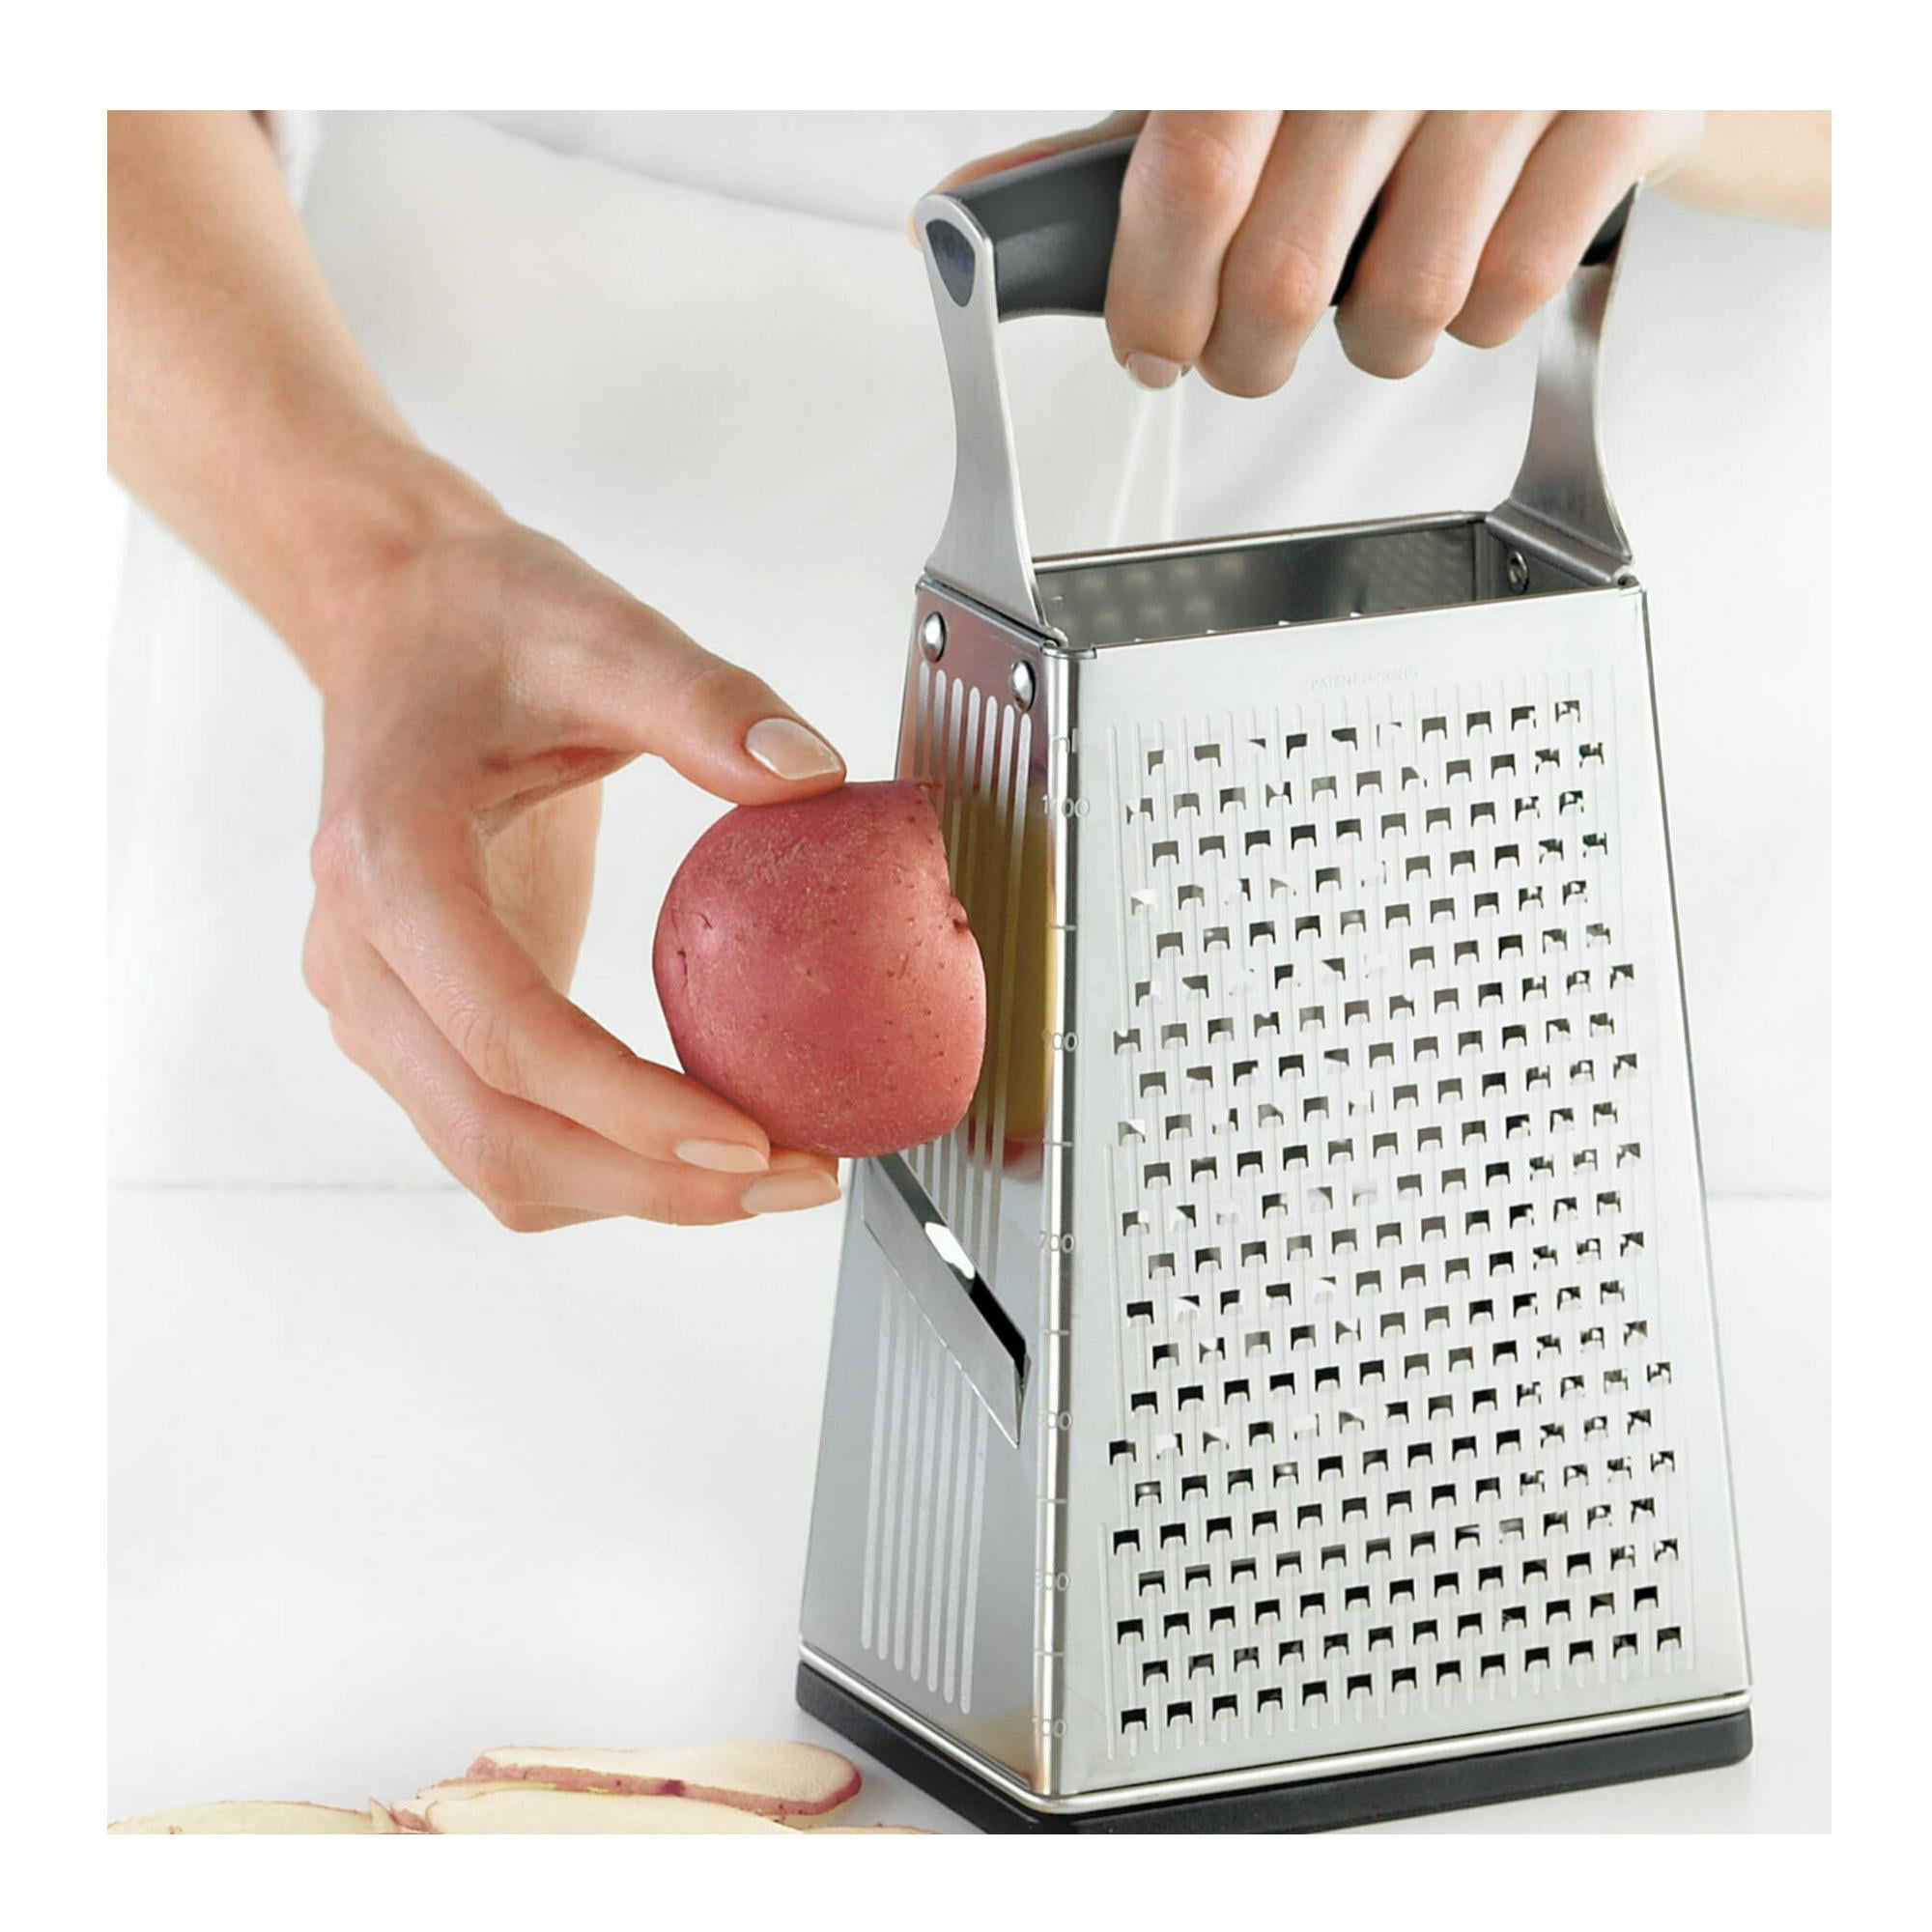  CUISIPRO 6 Sided Box Grater, One size, Black: Home